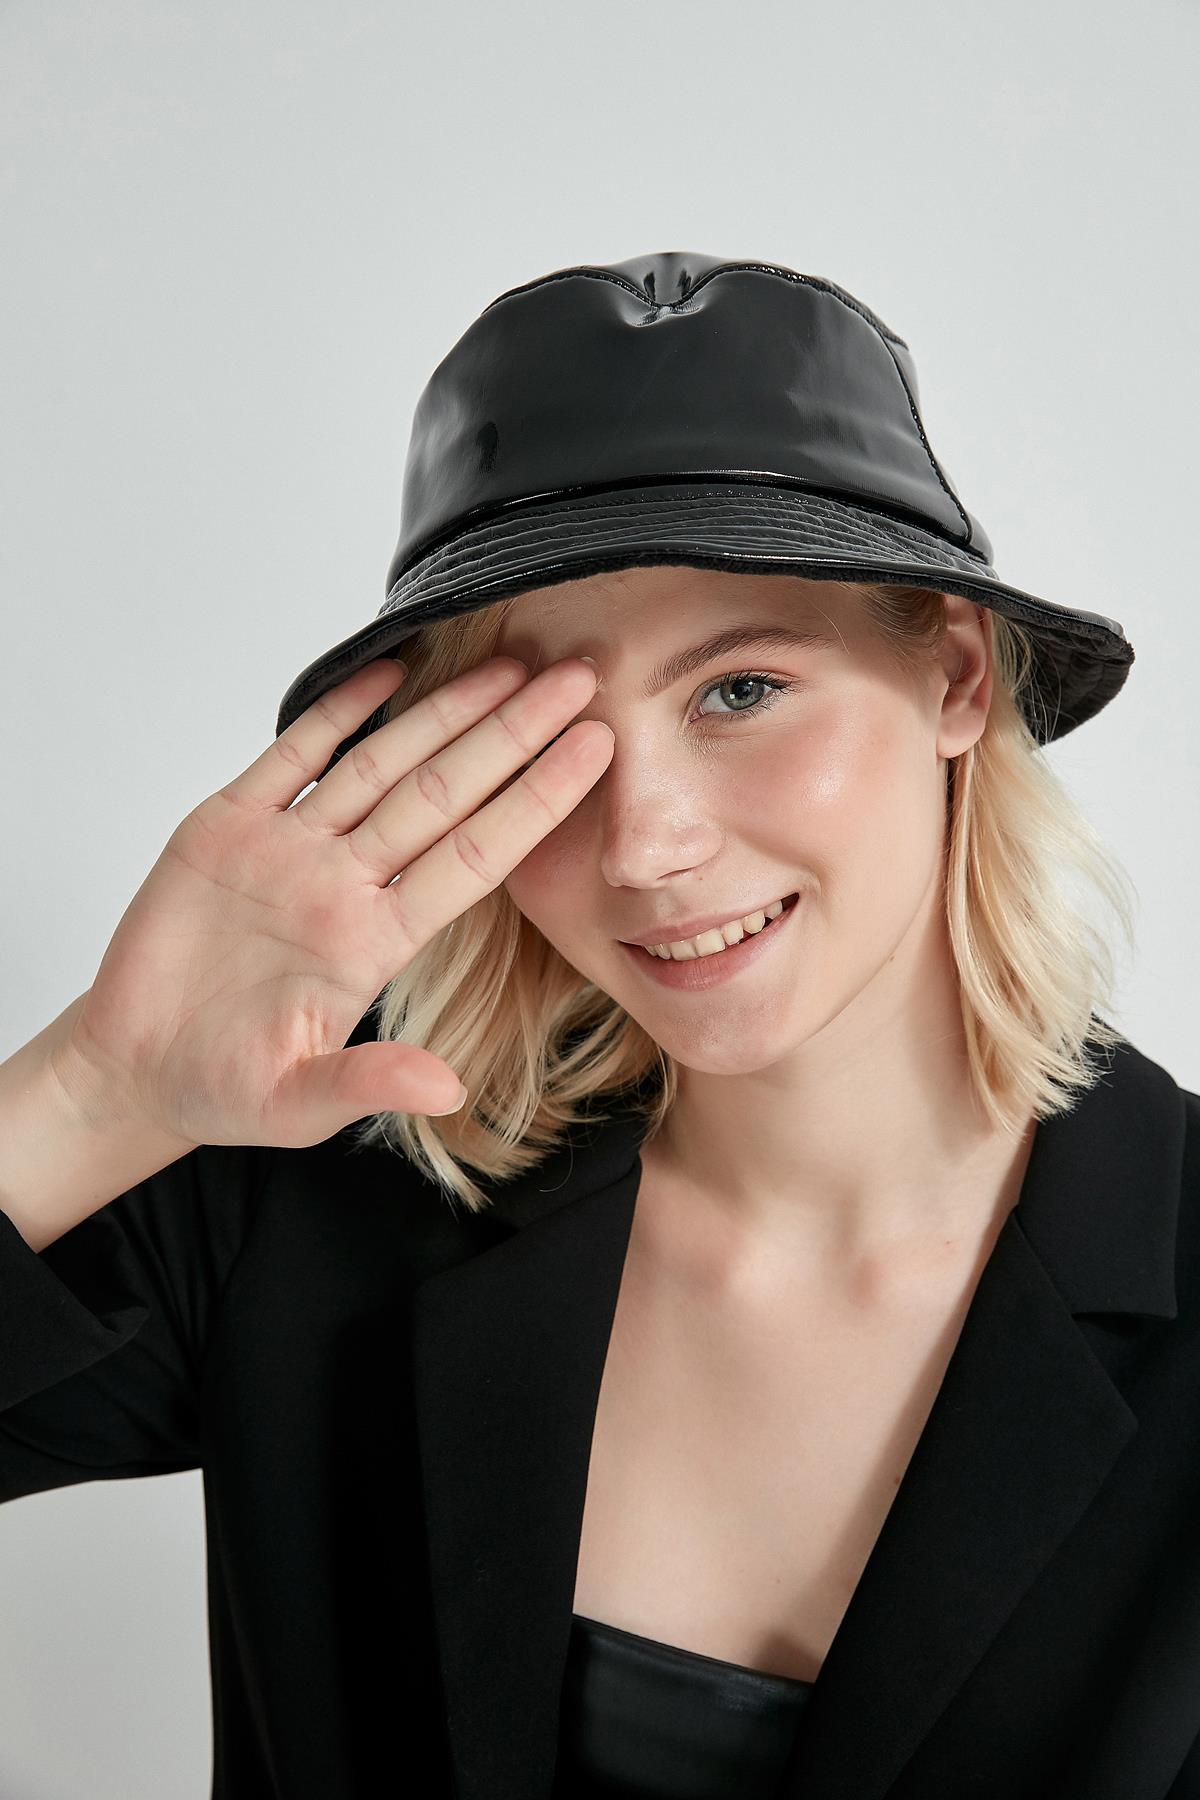 A model wears NSV11144 - Patent Leather Bucket Hat - Black, wholesale Hat of Nesvay to display at Lonca